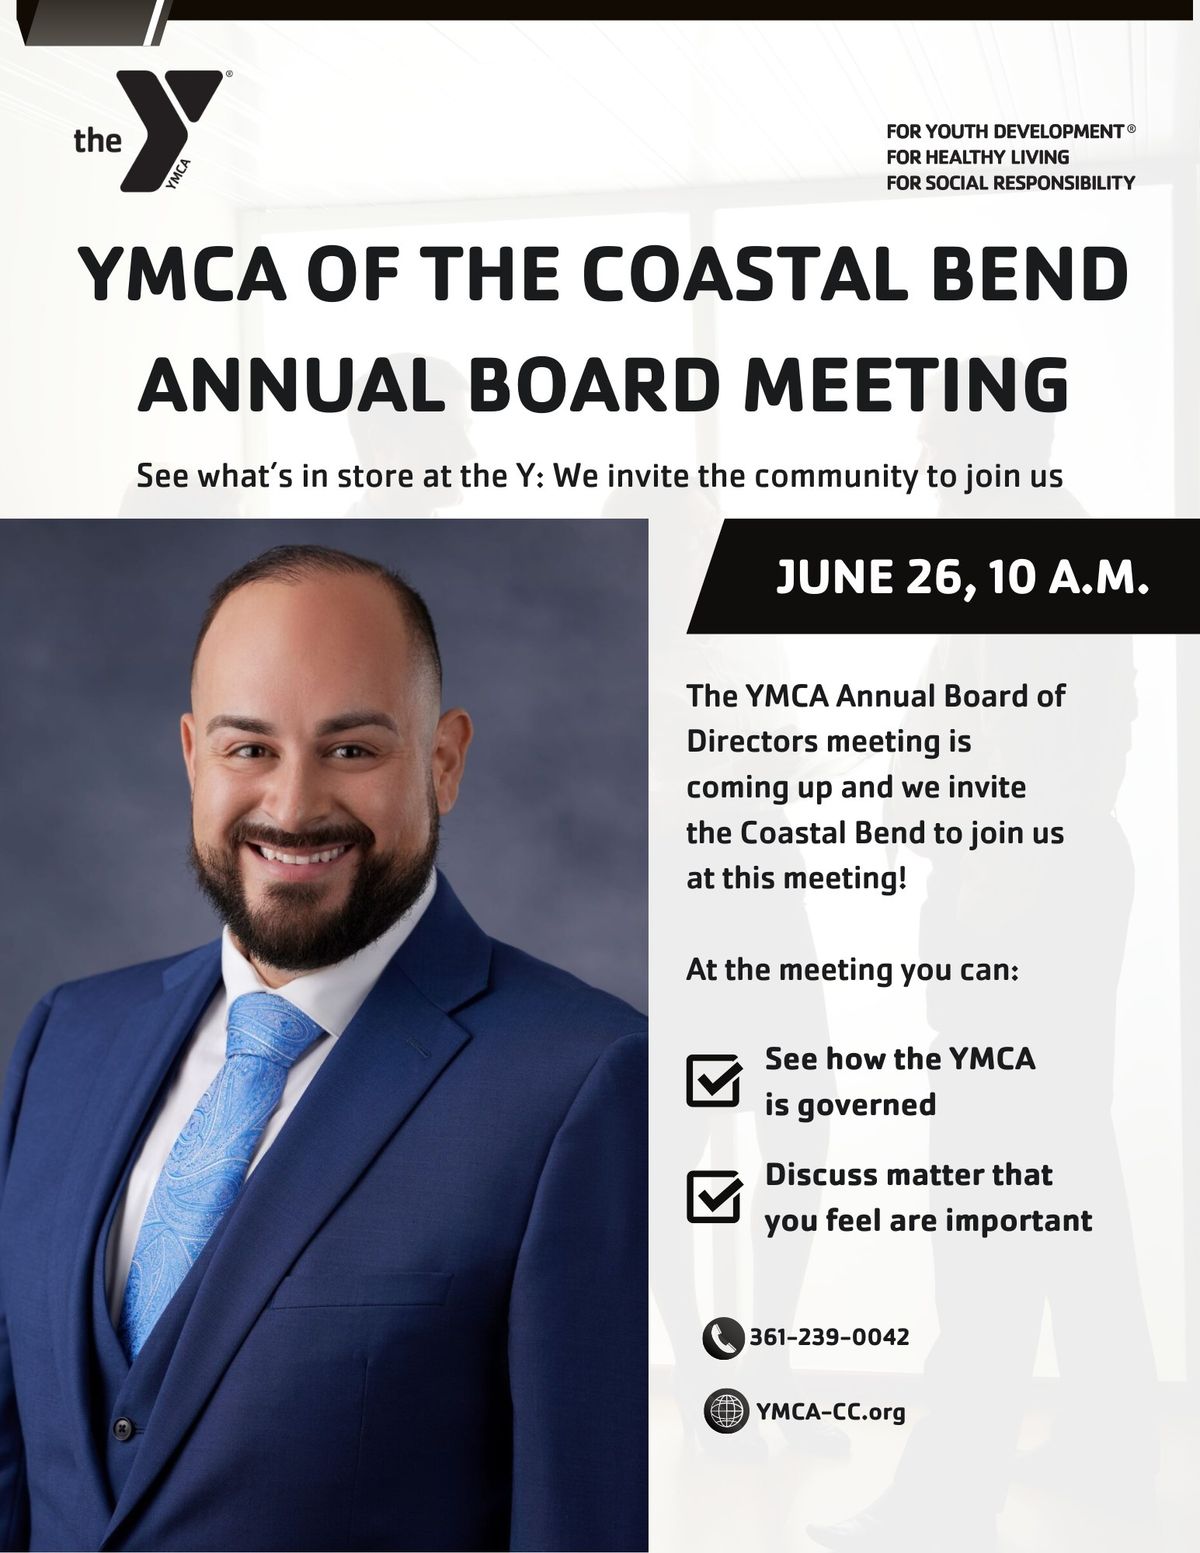 YMCA of the Coastal Bend Annual Board Meeting